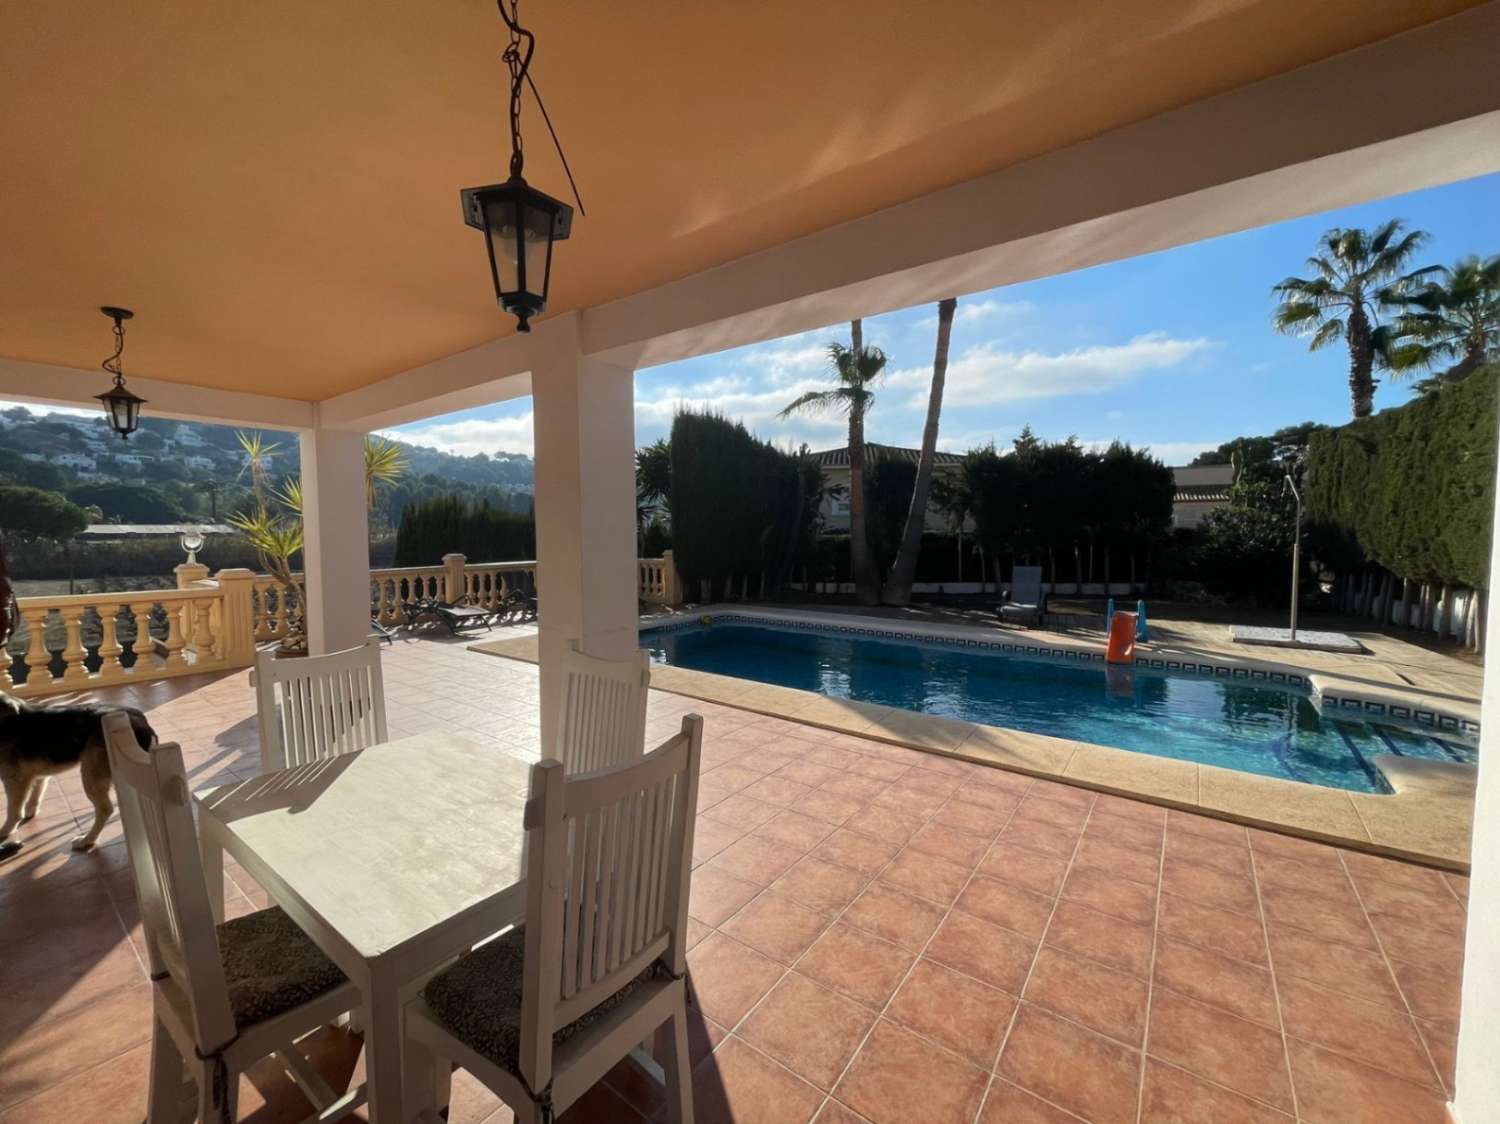 VILLA IN MORAIRA SOL PARK, FLAT WALKING DISTANCE TO THE TOWN AND BEACH, FOR SALE